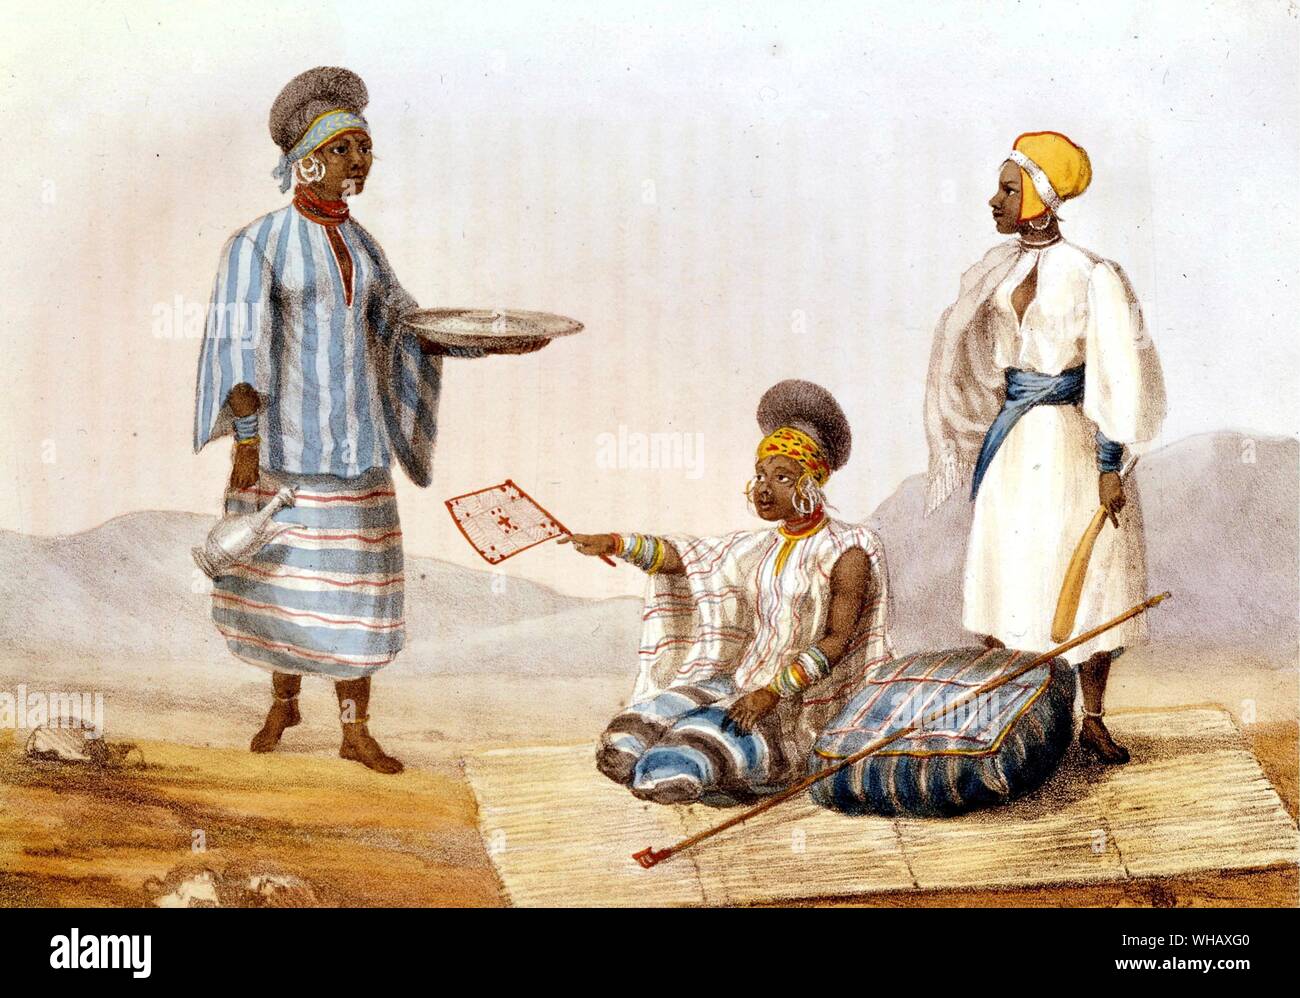 Sudanese women from narrative of travels in North Africa.The African Adventure - A History of Africa's Explorers by Timothy Severin, page 3090. Stock Photo